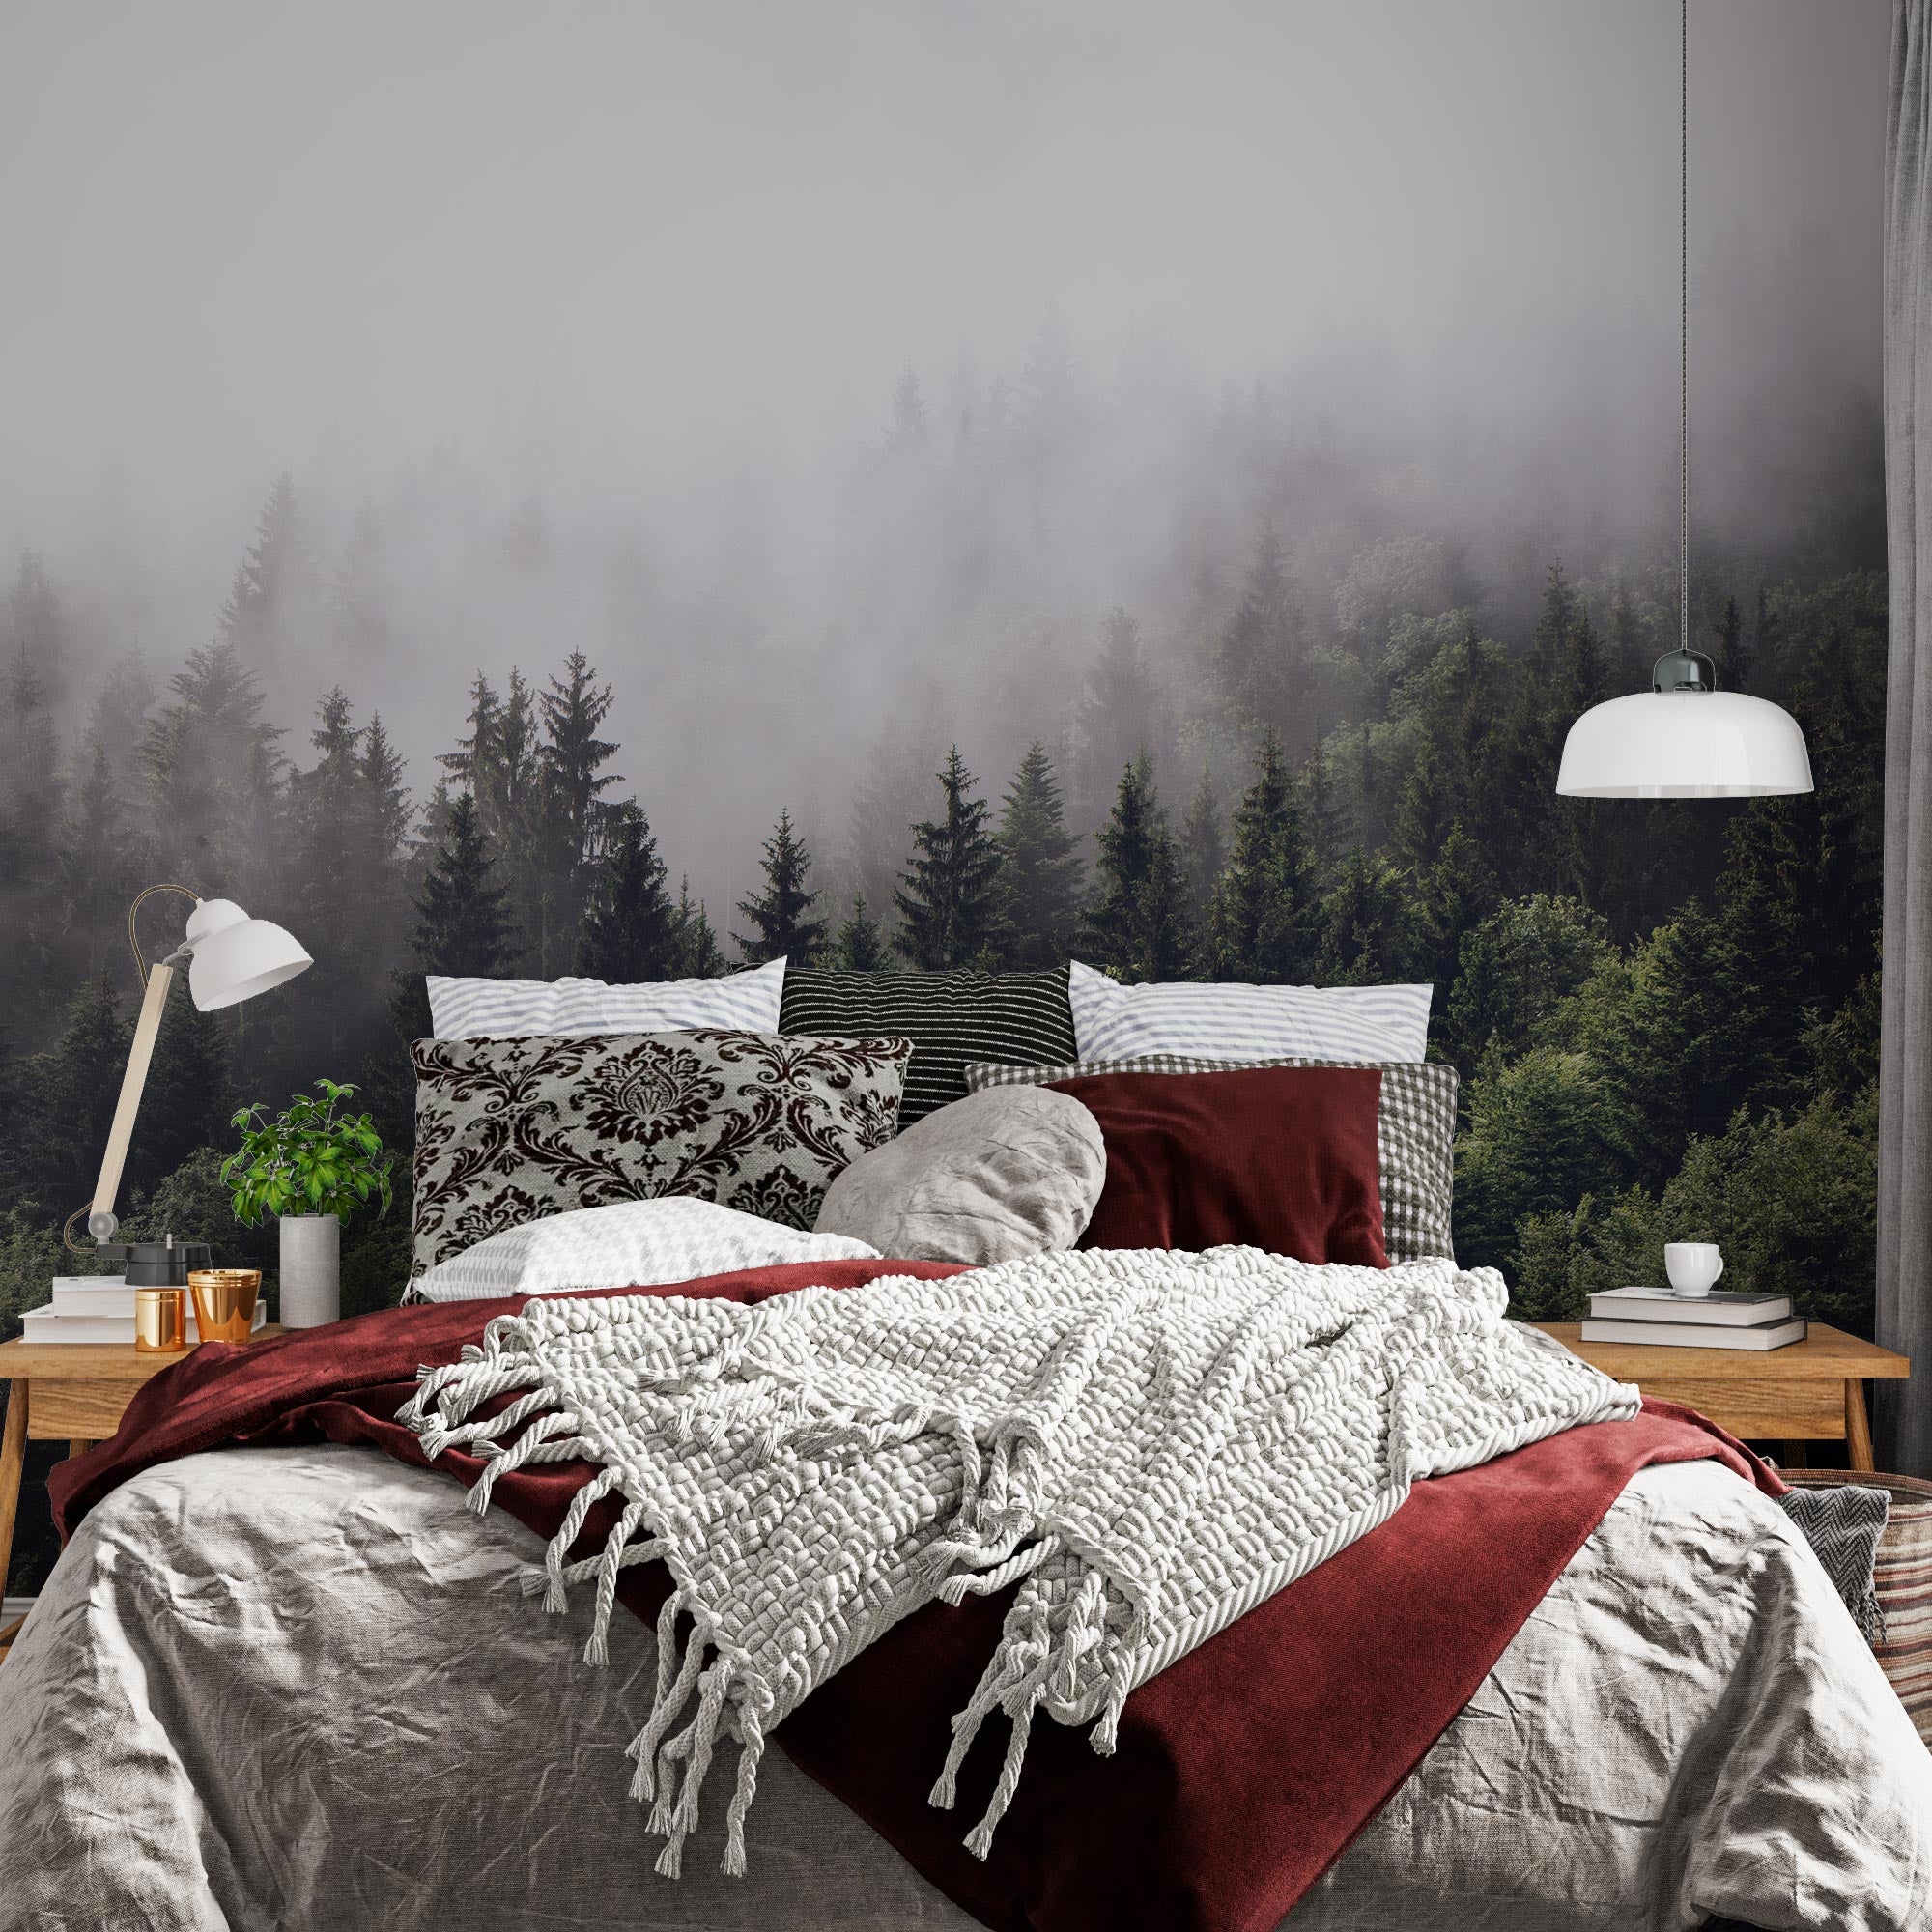 files/A-peel-and-stick-wallpaper-mural-depicting-a-foggy-forest.-The-forest-is-bathed-in-a-soft-light_-creating-a-serene-and-calming-atmosphere.-Perfect-wallpaper-for-your-bedroom-walls.jpg